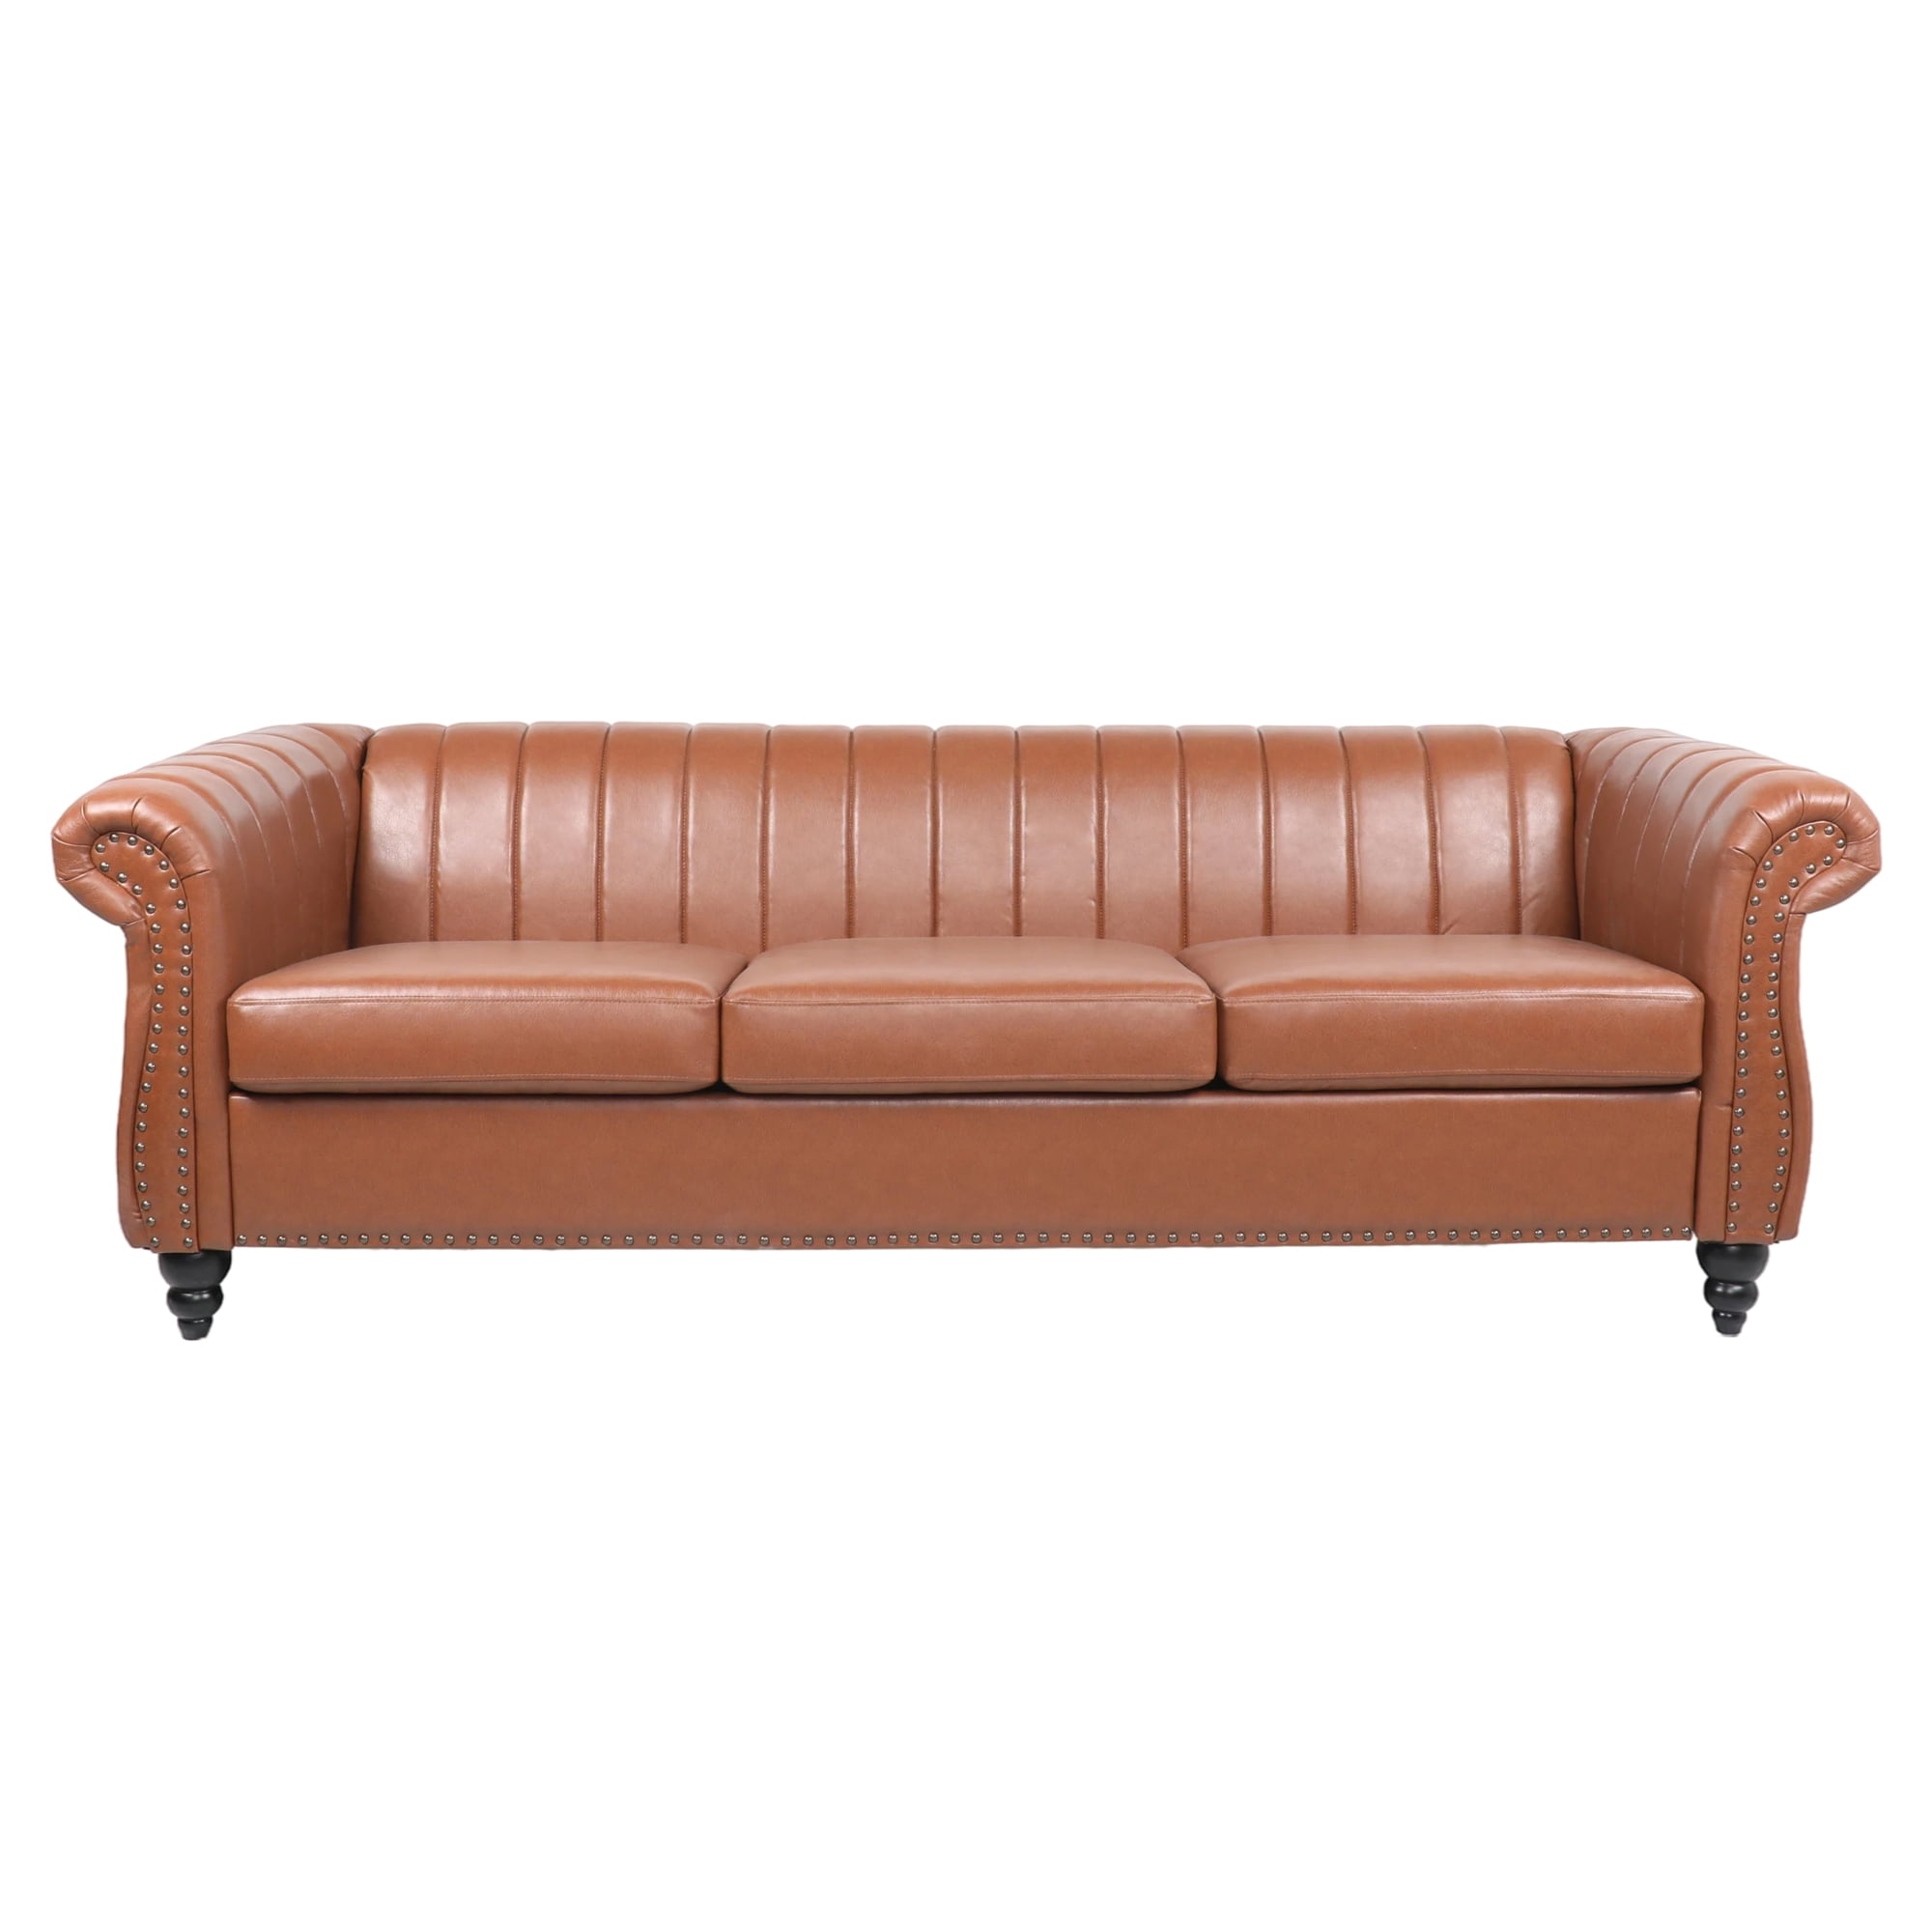 Promotion Clearance Living Room Sofa 3, Clearance Leather Furniture